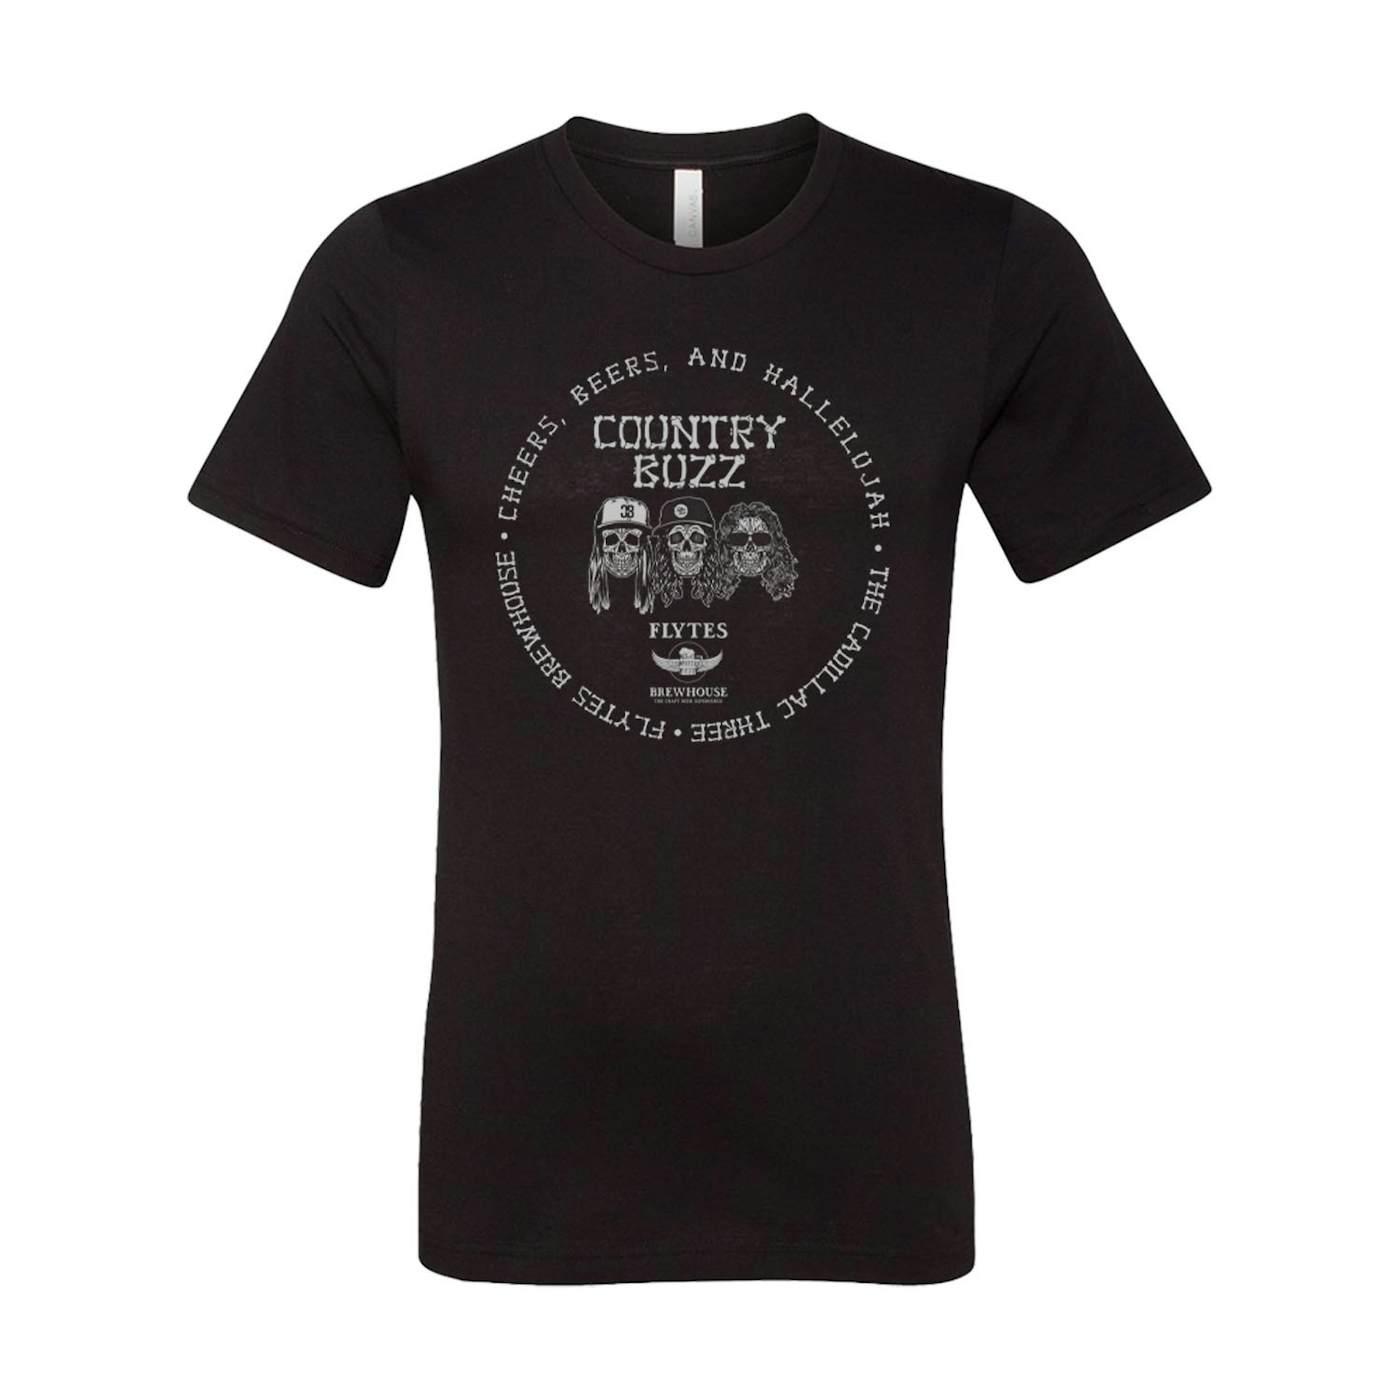 THE CADILLAC THREE COUNTRY BUZZ FLYTES BREWHOUSE TEE